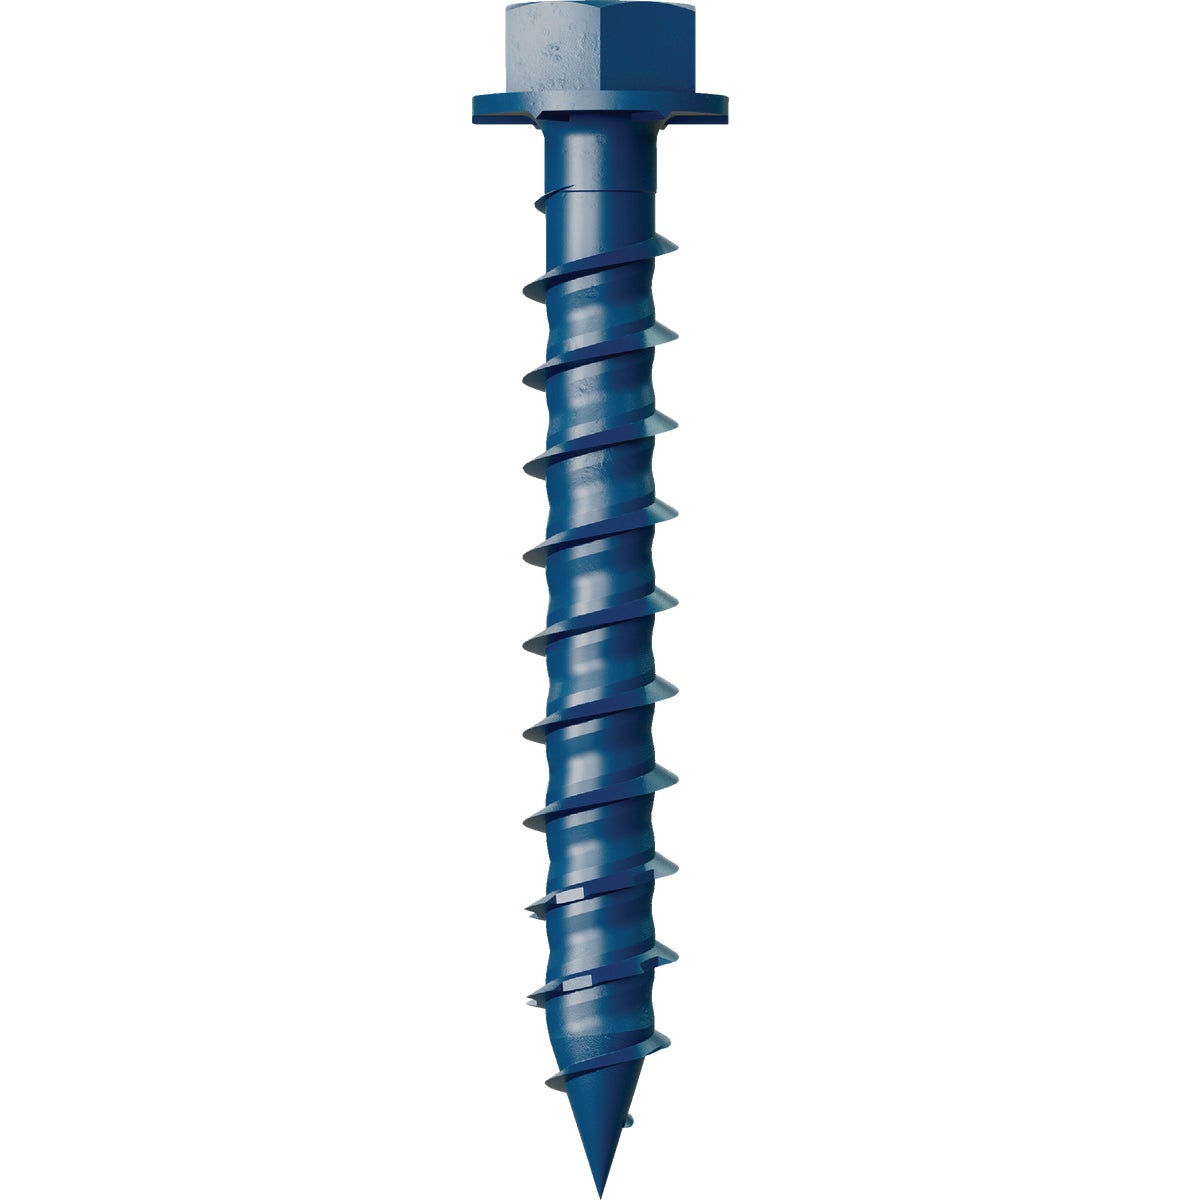 Simpson Strong-Tie Titen Turbo  1/4 in. x 1-3/4 in. Hex-Head Concrete and Masonry Screw, Blue (75-Qty)